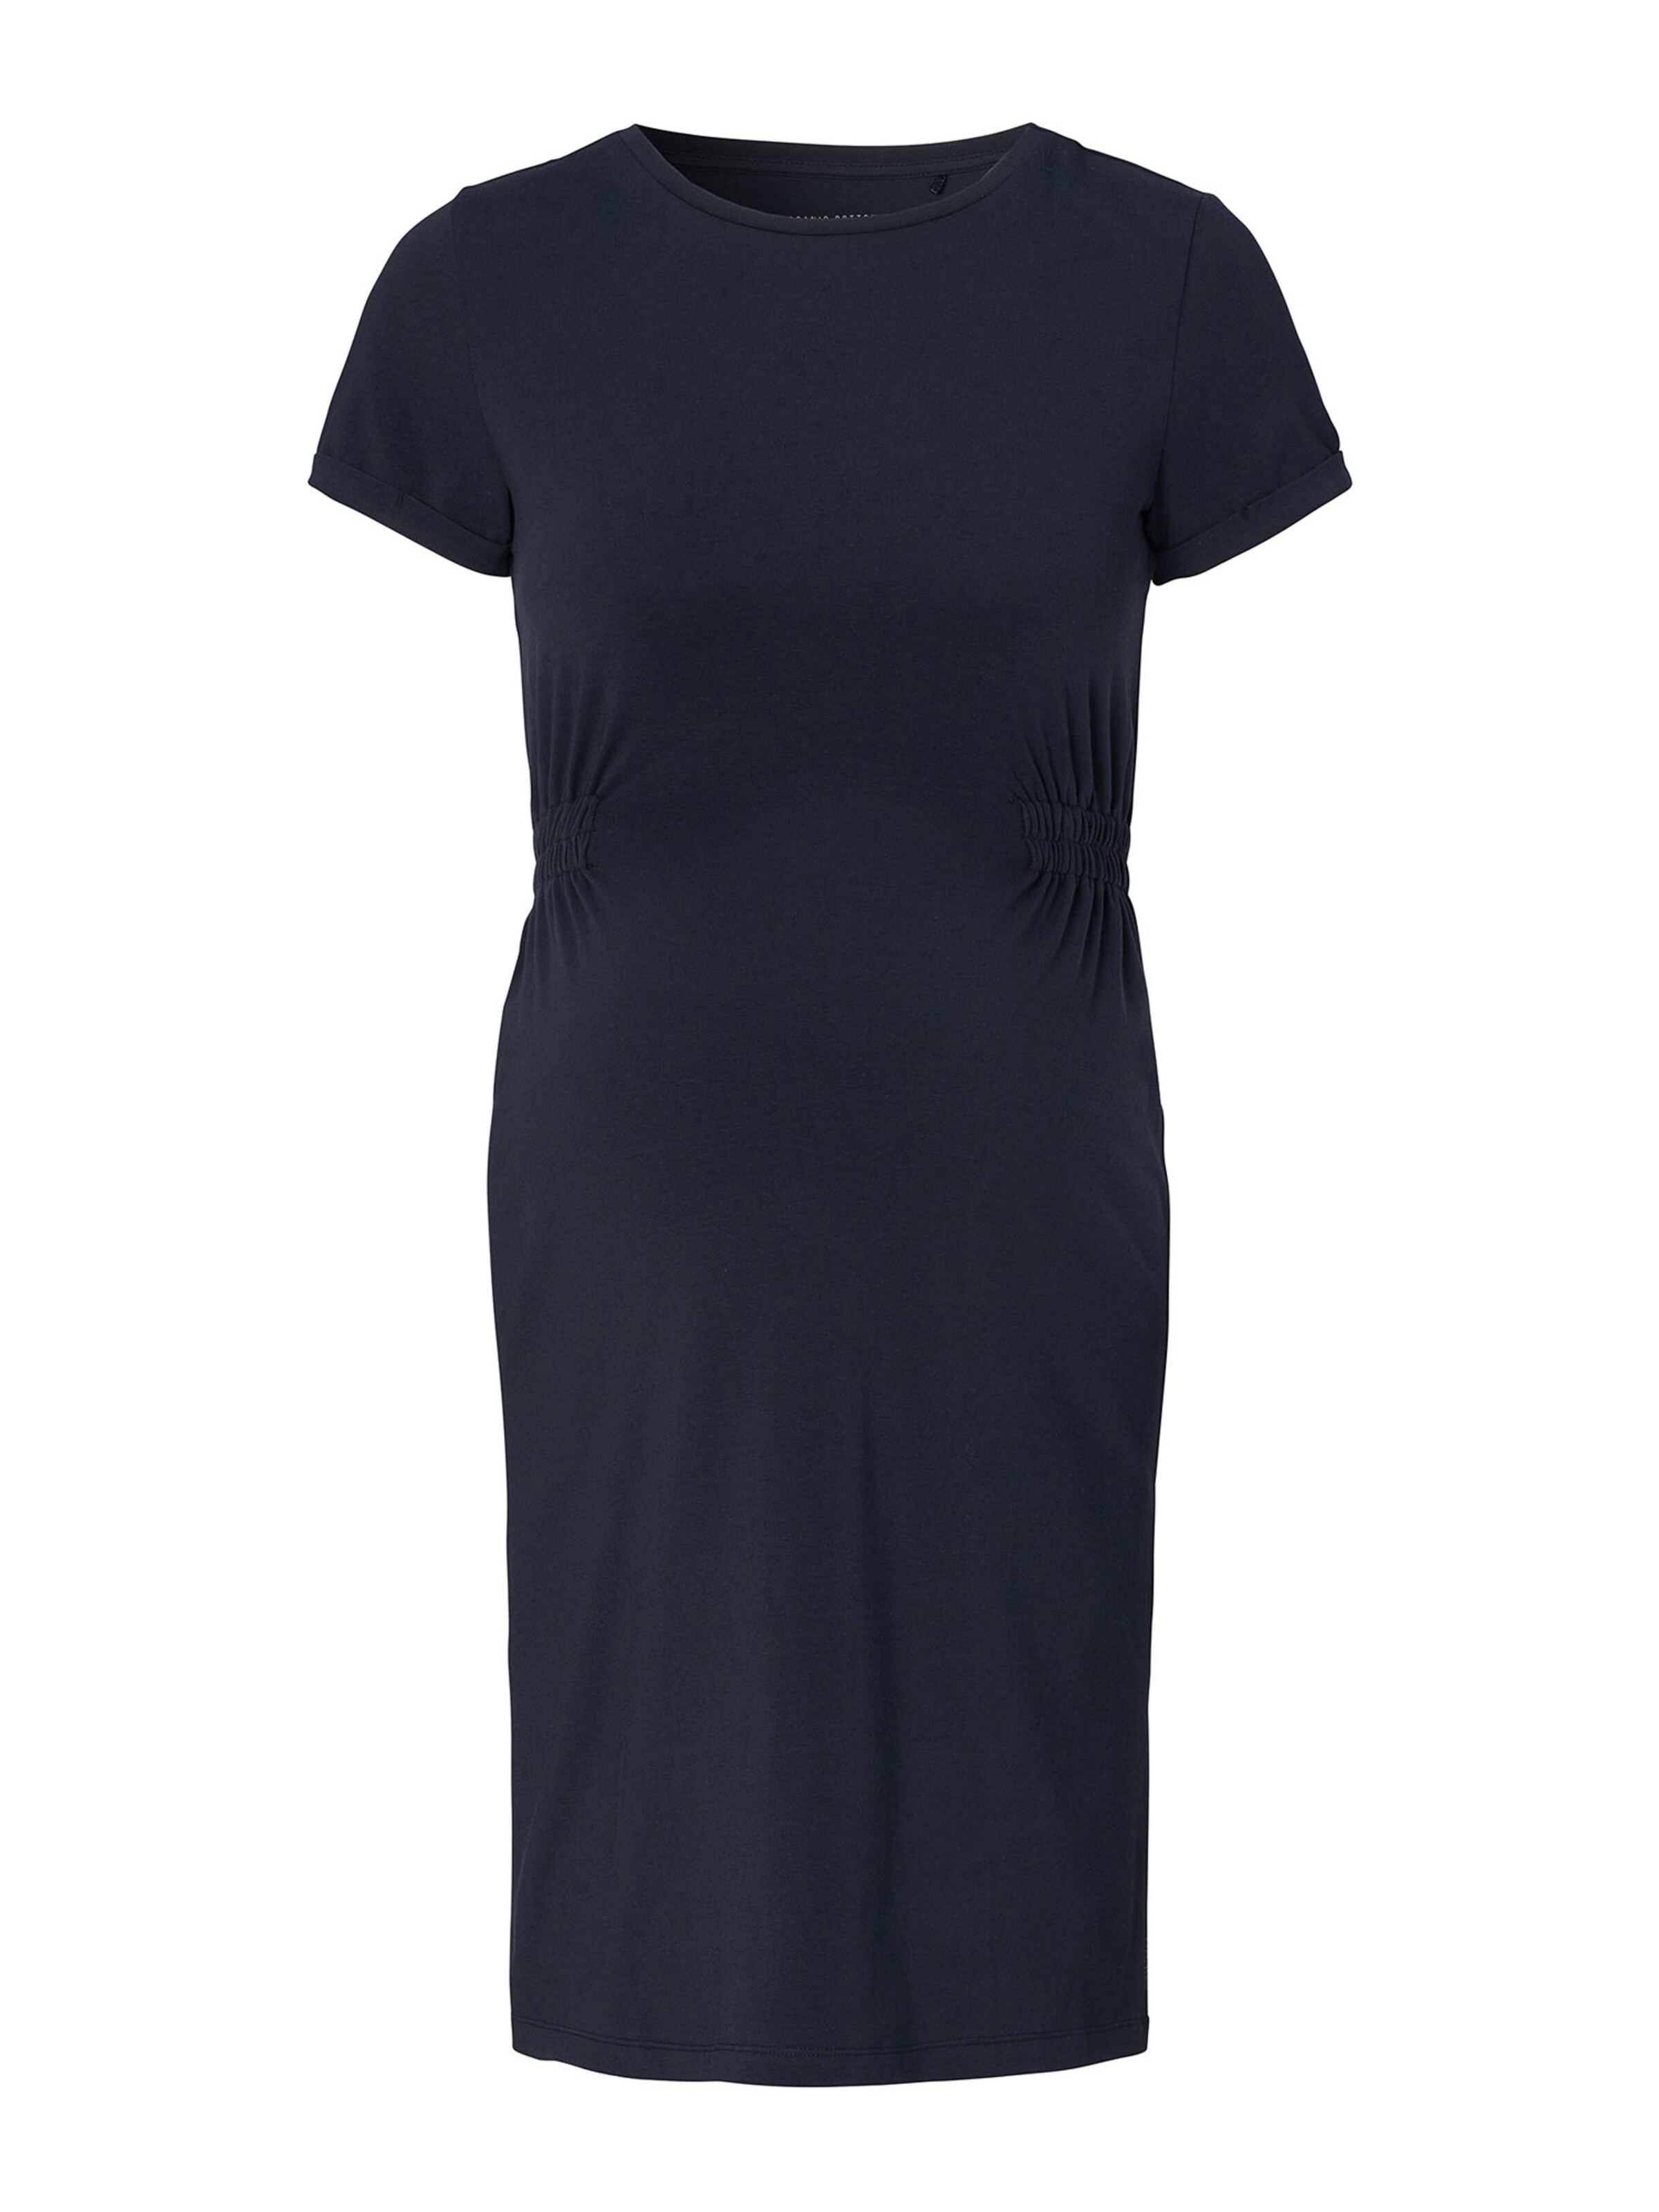 gbCHJ Donna Esprit Maternity Abito in Navy 